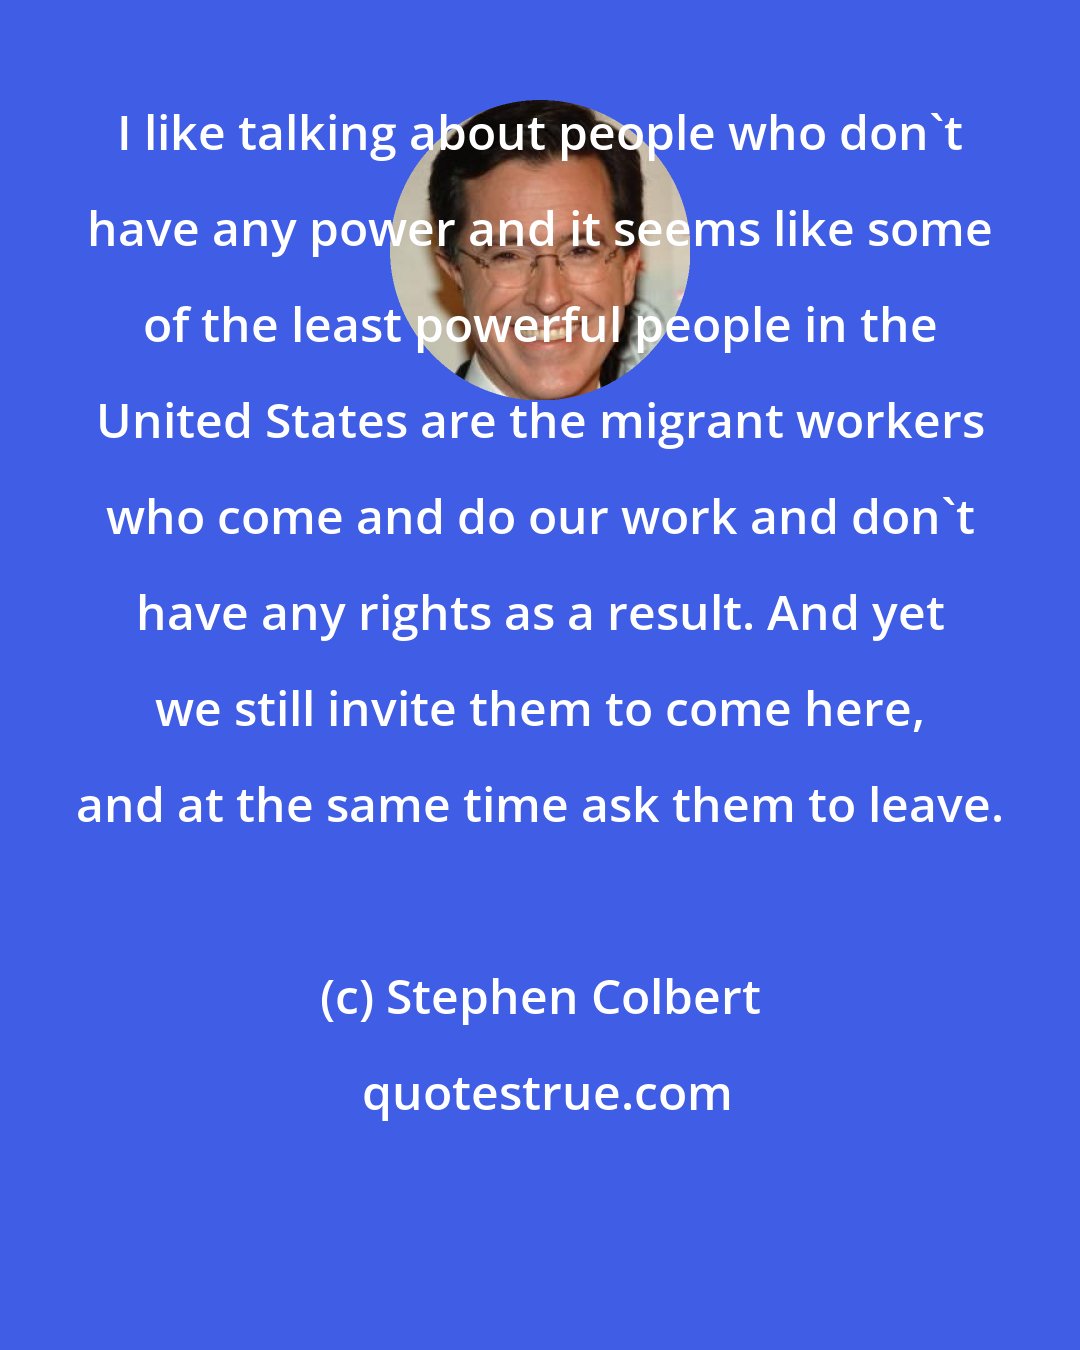 Stephen Colbert: I like talking about people who don't have any power and it seems like some of the least powerful people in the United States are the migrant workers who come and do our work and don't have any rights as a result. And yet we still invite them to come here, and at the same time ask them to leave.